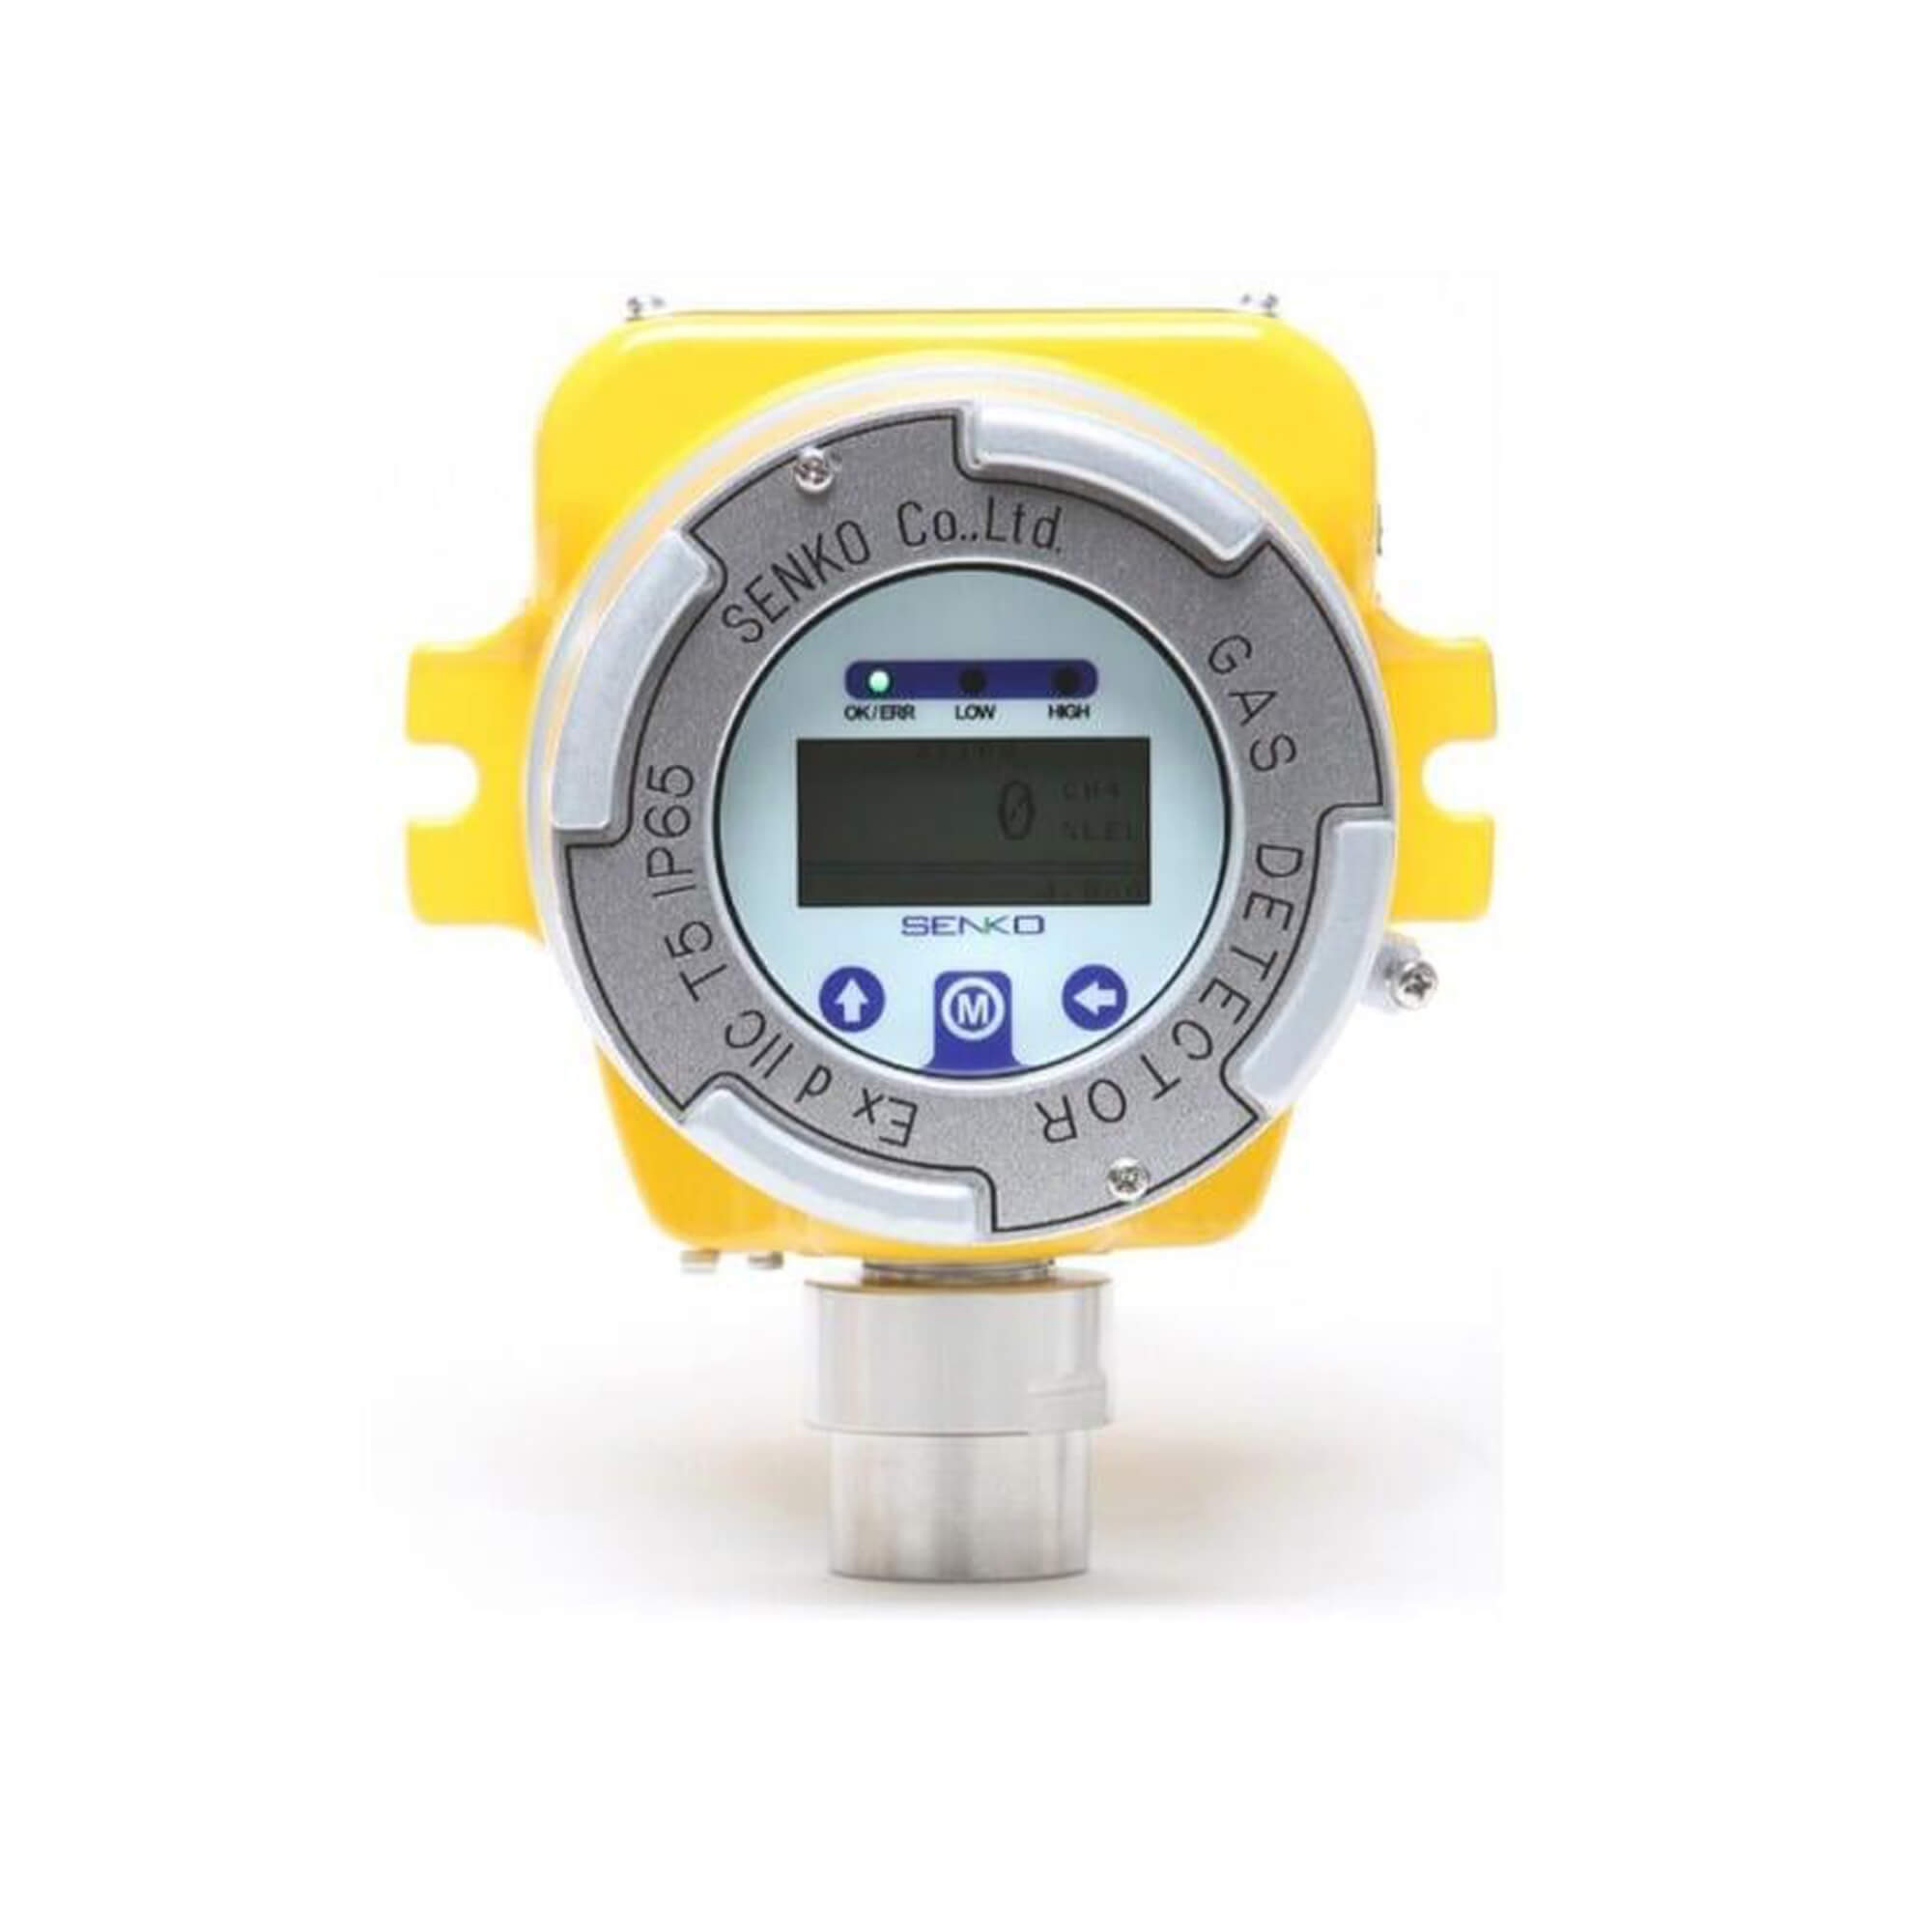 Fixed Gas Detector SI-100R